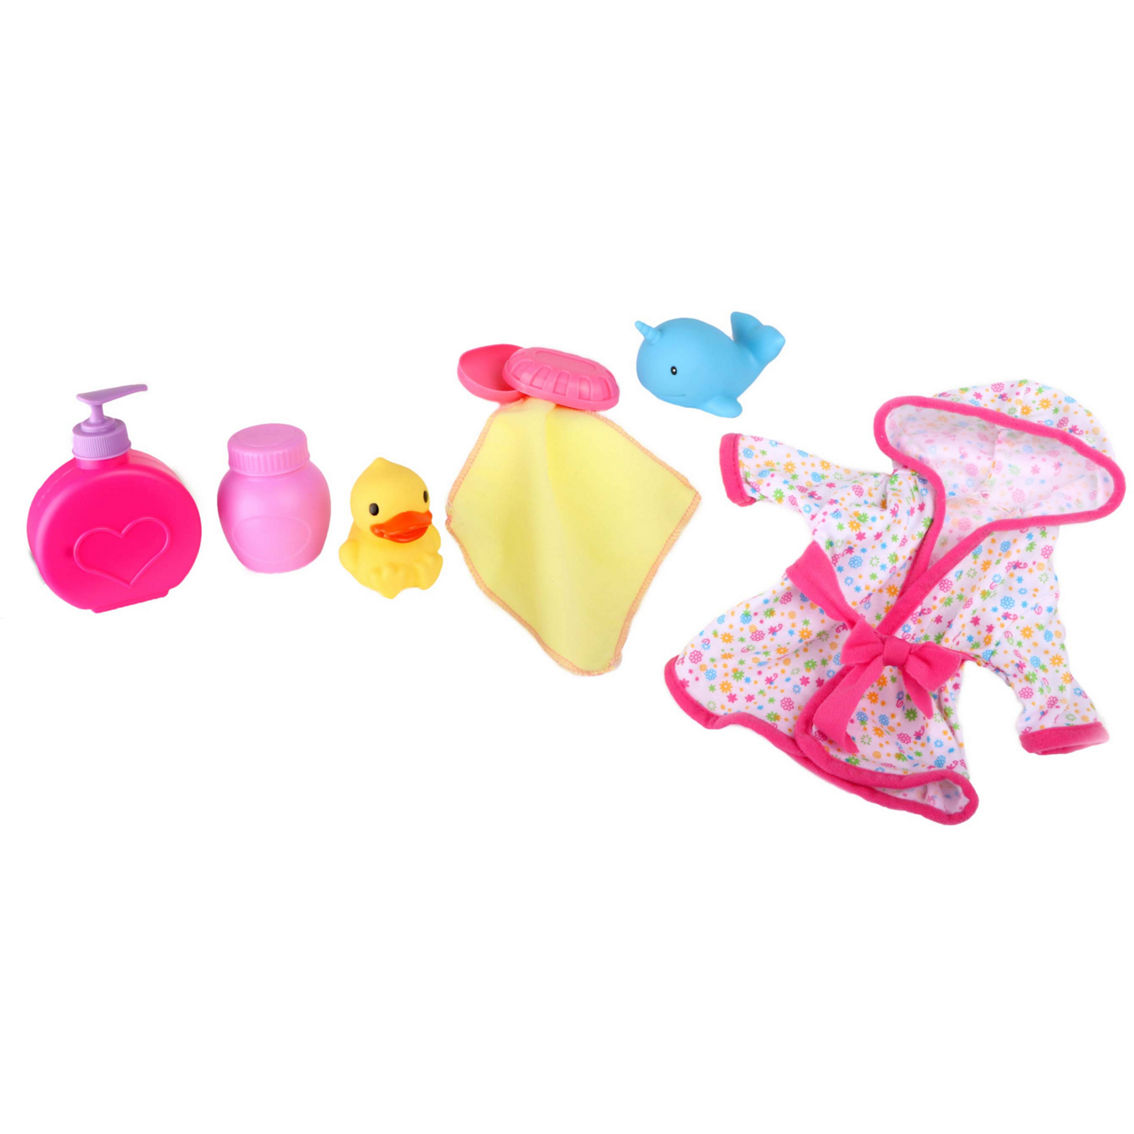 Dream Collection 12 in. Baby Bath Time Play Set - Image 5 of 5